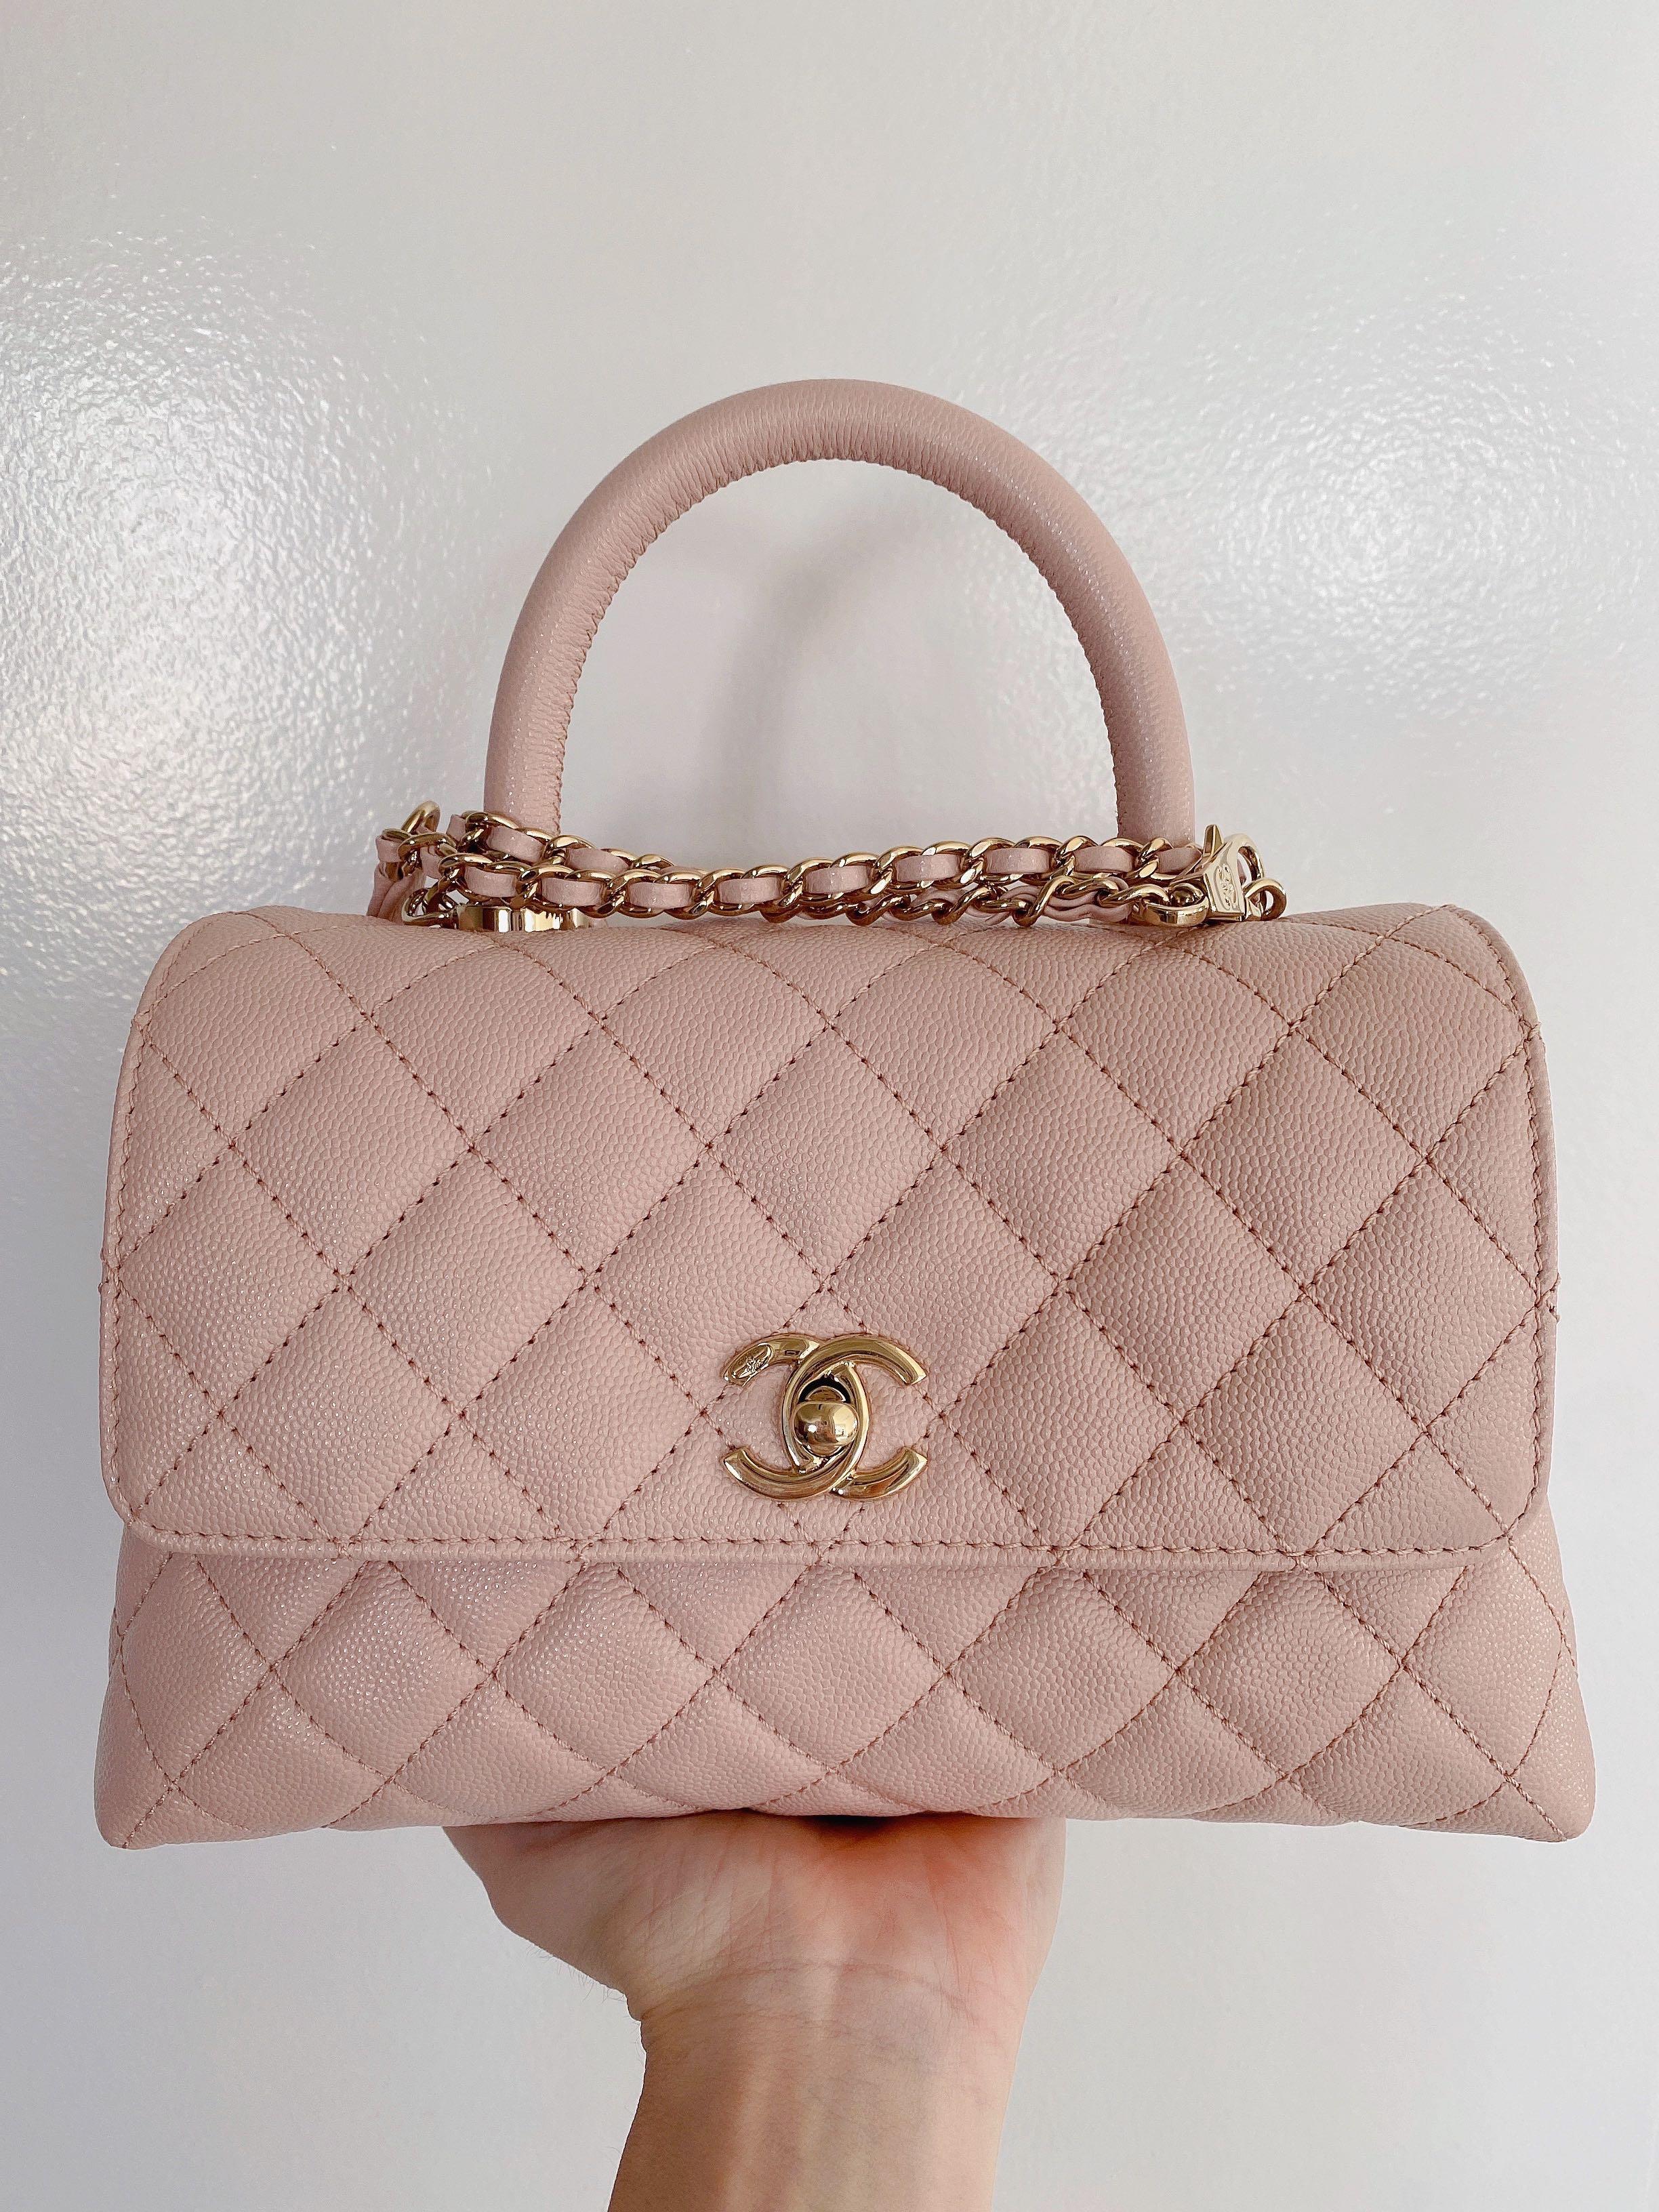 Chanel Small Coco Handle in 21A Rose Clair